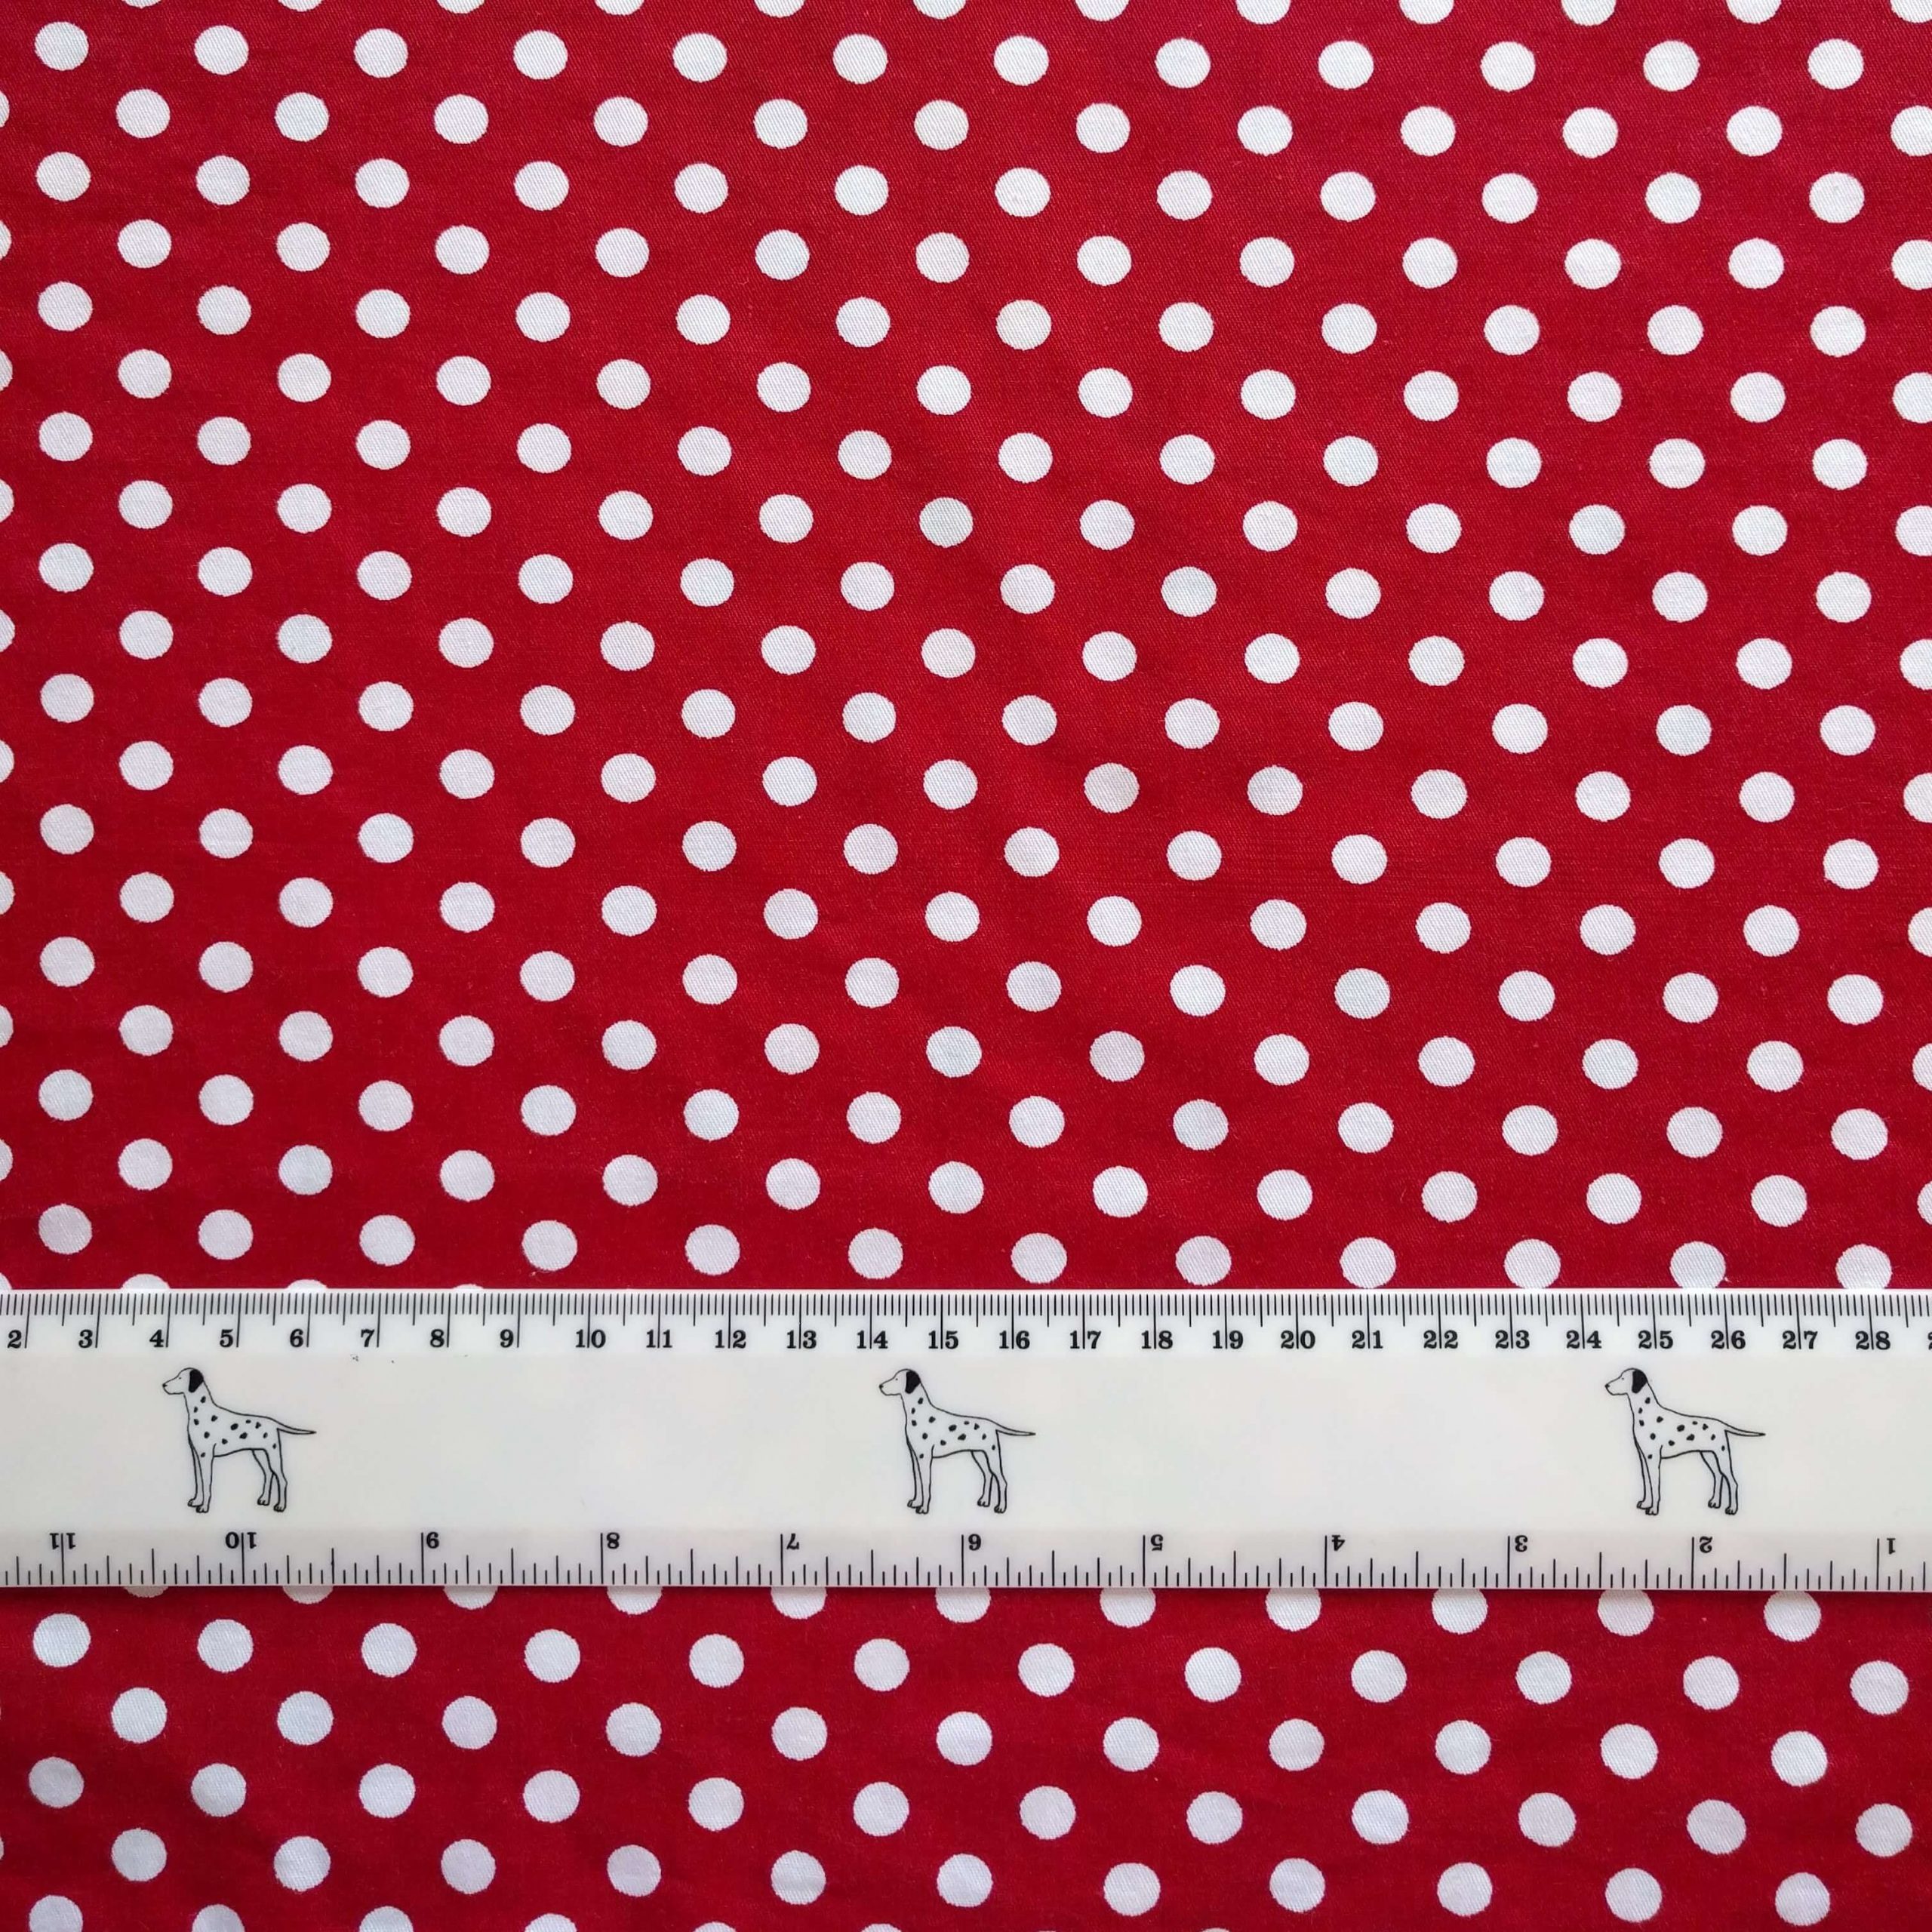 Red polka dots - 100% cotton